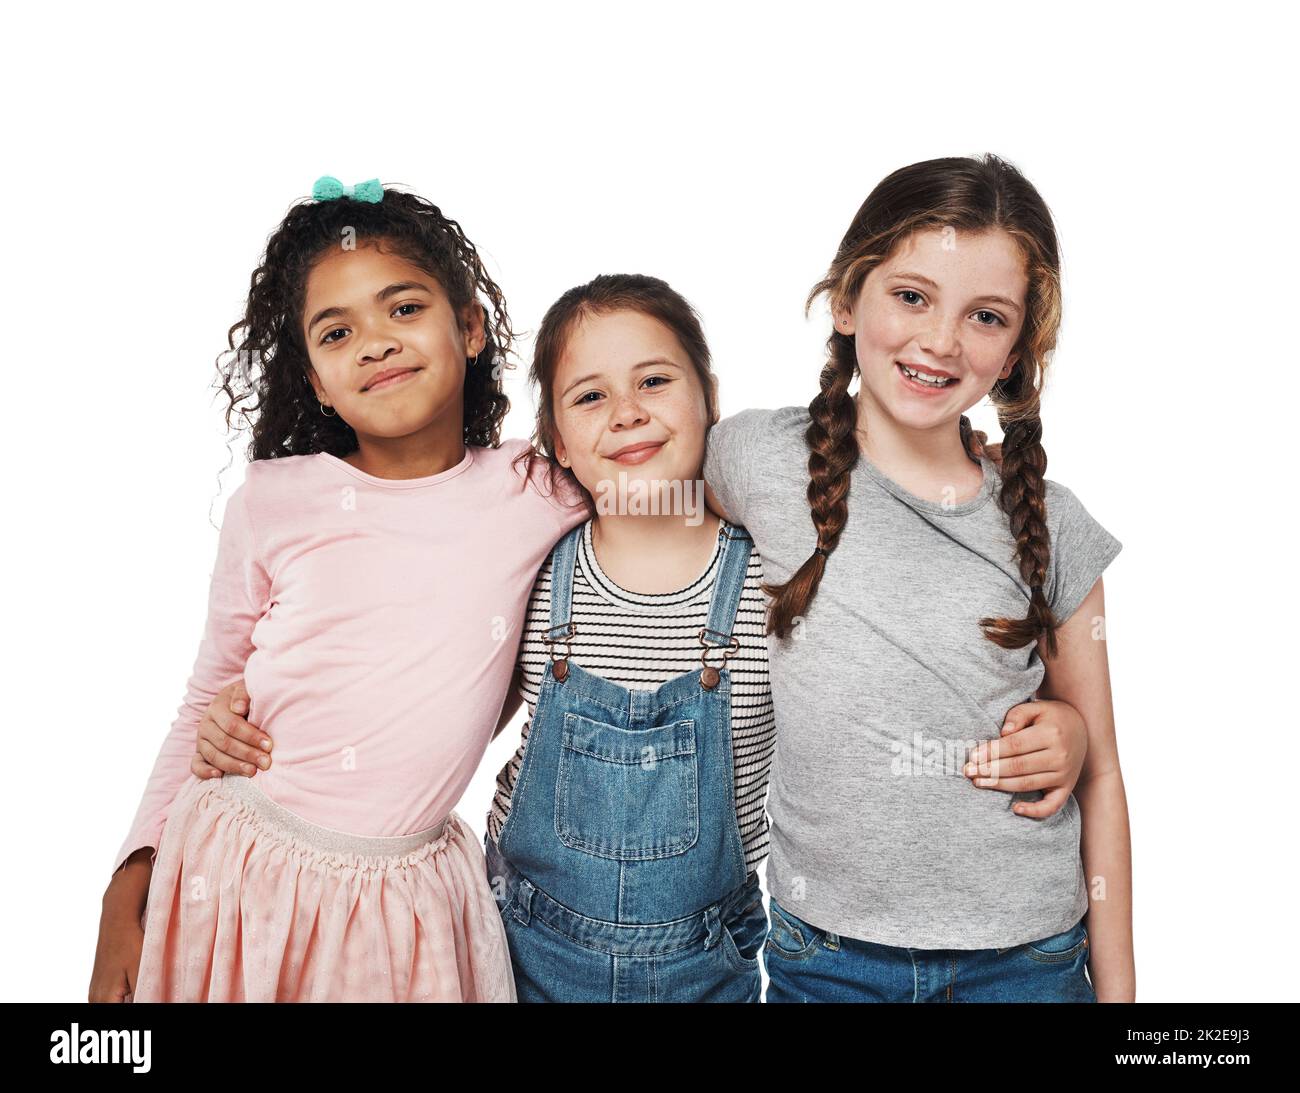 Friends like us are forever. Studio portrait of a group of three happy girls embracing one another against a white background. Stock Photo